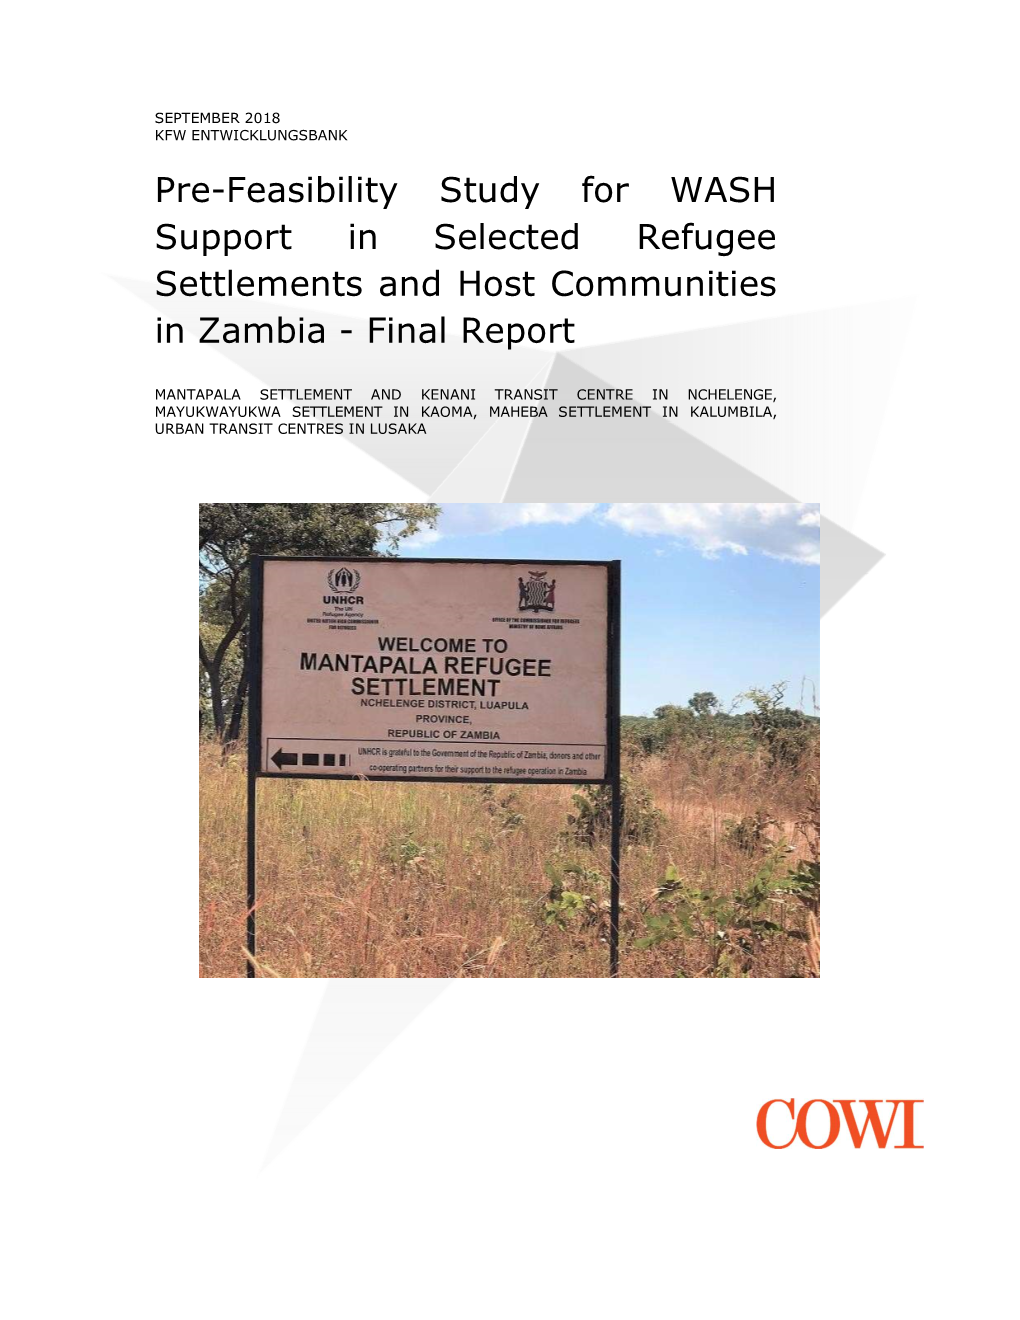 Pre-Feasibility Study for WASH Support in Selected Refugee Settlements and Host Communities in Zambia - Final Report